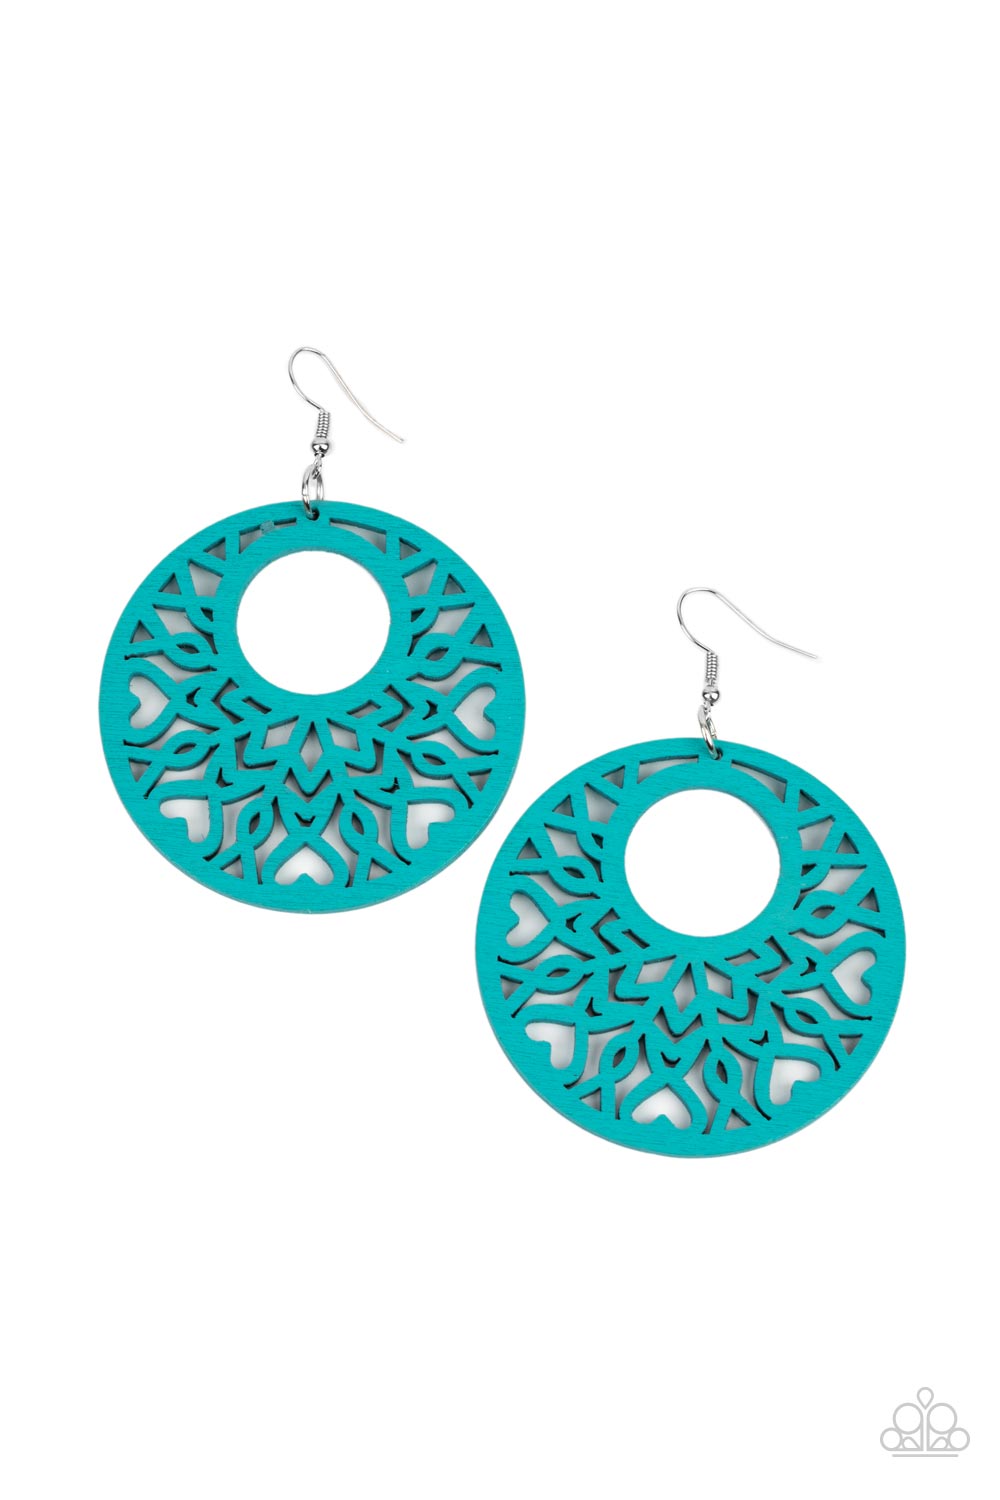 Tropical Reef - Blue Wood - Silver Earrings - Paparazzi Accessories - Refreshing blue, an airy circular wooden frame features a cut-out heart motif reminiscent of bohemian designs creating a free-spirited allure. Earring attaches to a standard fishhook fitting. Bejeweled Accessories By Kristie - Trendy fashion jewelry for everyone -